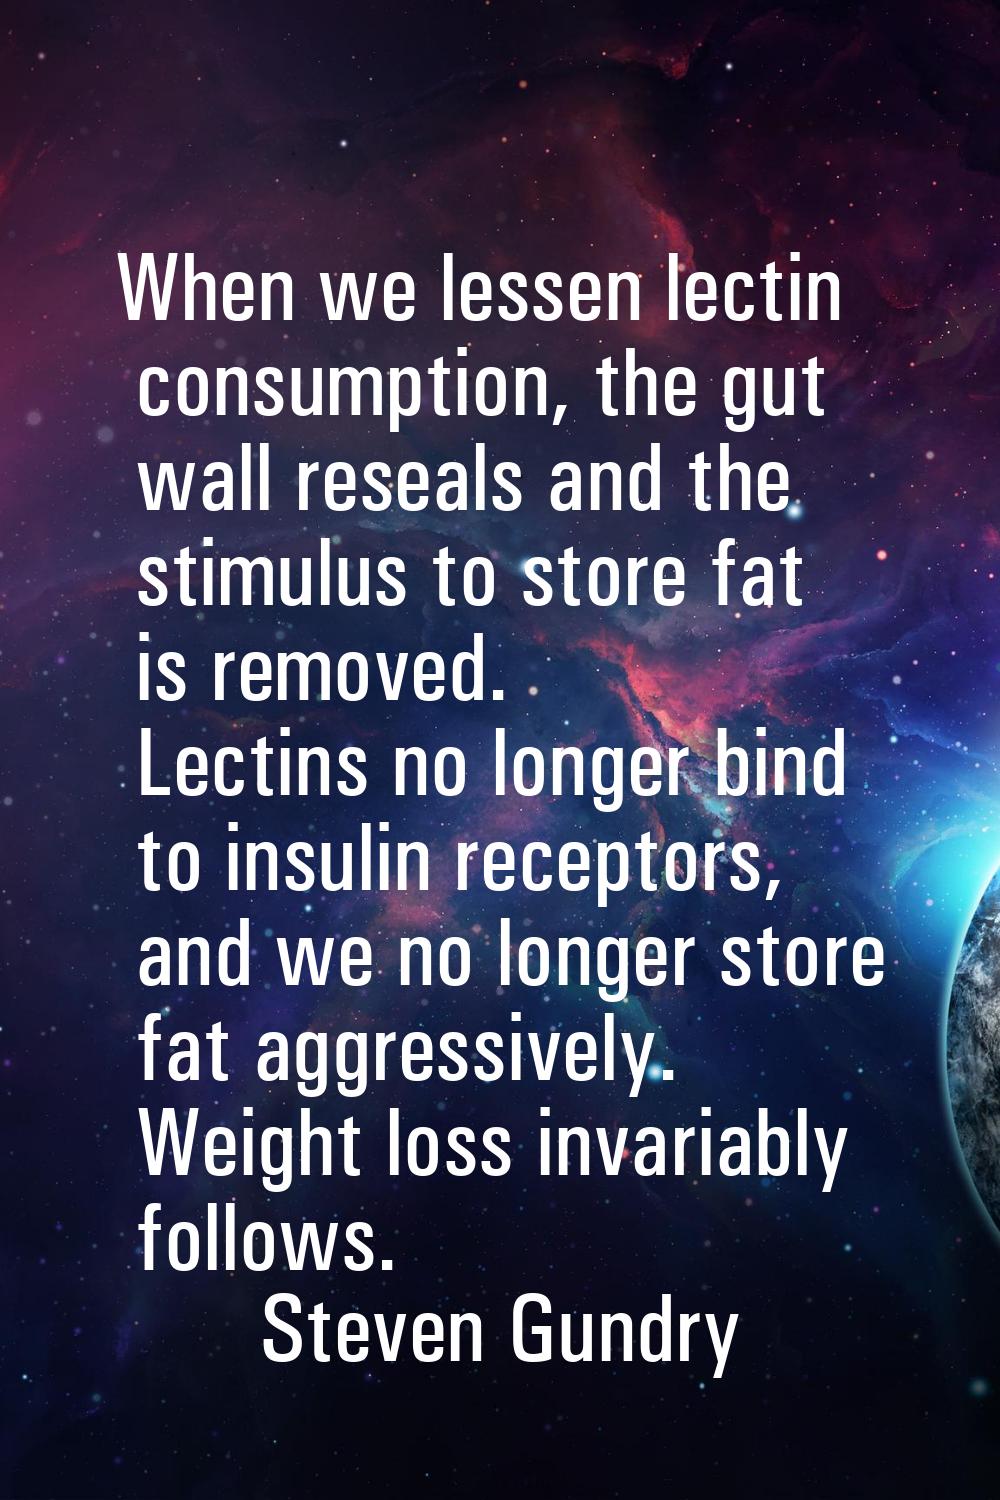 When we lessen lectin consumption, the gut wall reseals and the stimulus to store fat is removed. L